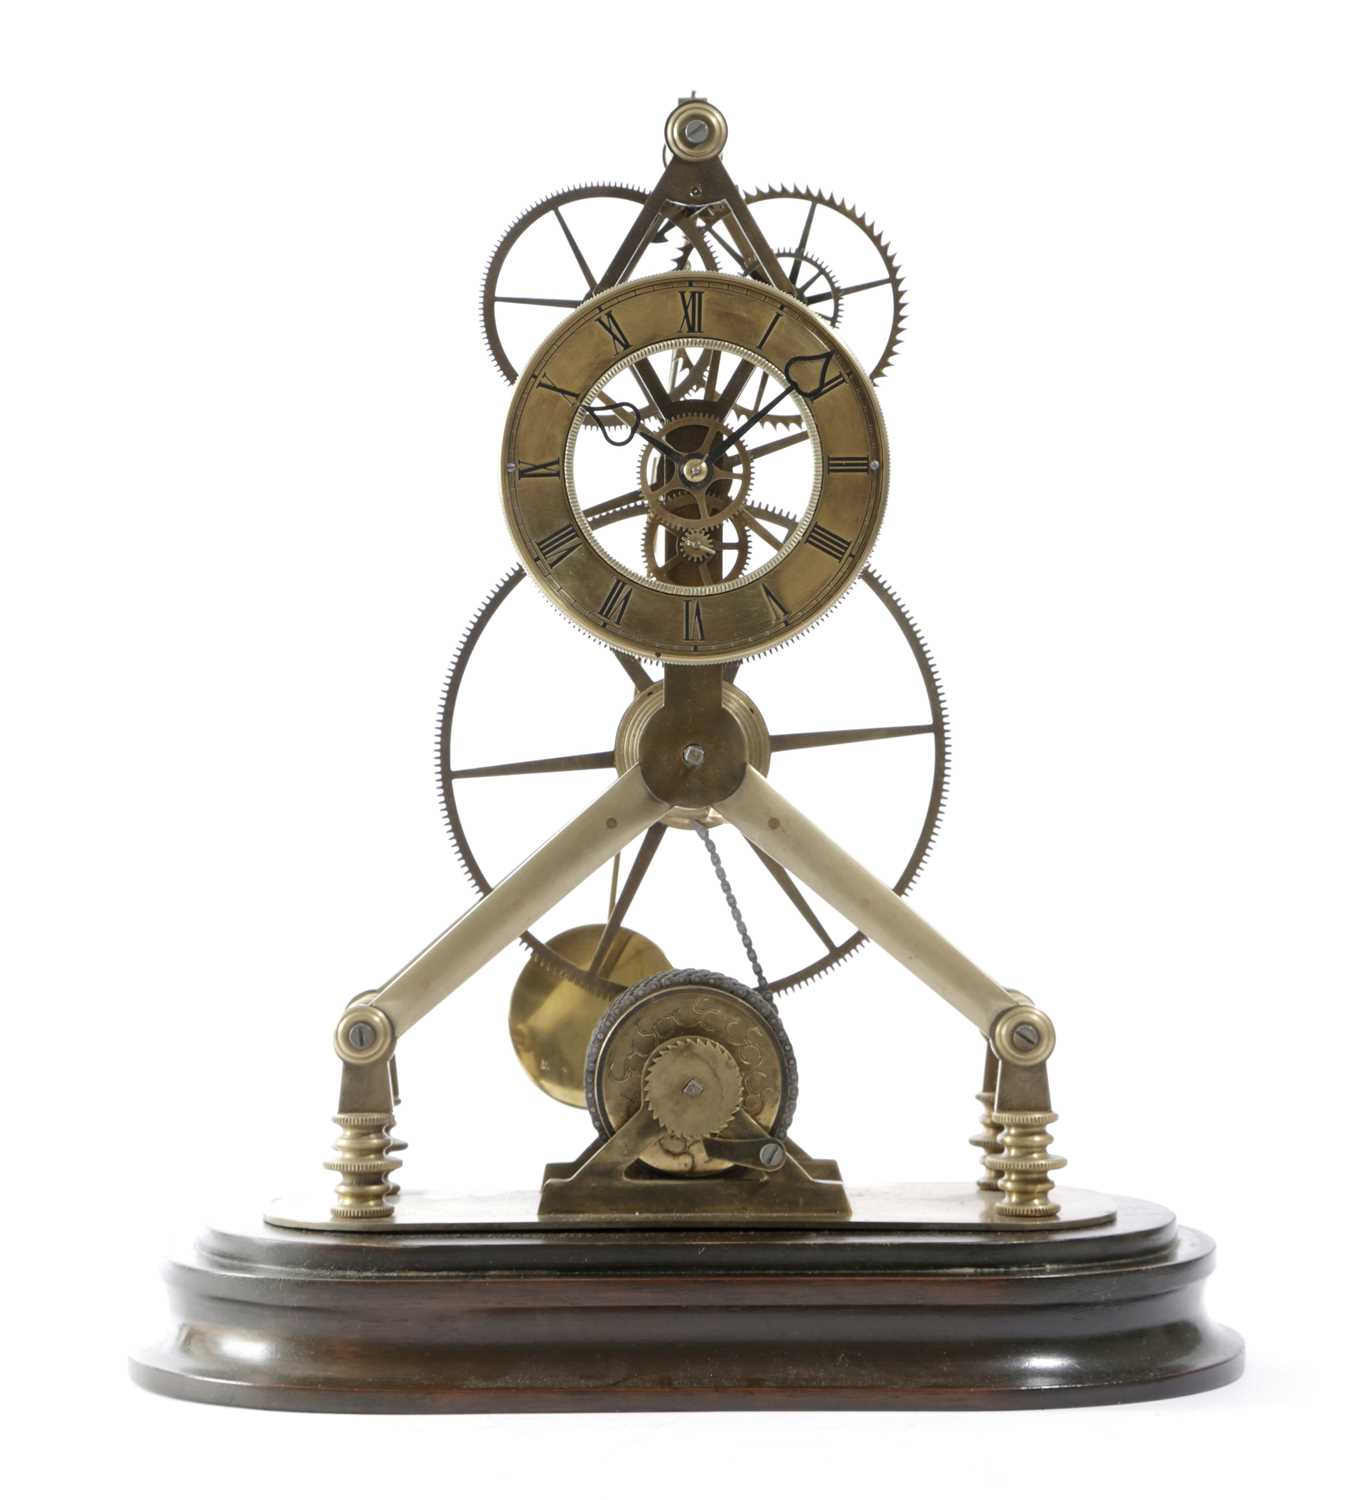 A BRASS 'GREAT WHEEL' SKELETON CLOCK IN VICTORIAN STYLE, 20TH CENTURY the chain driven single